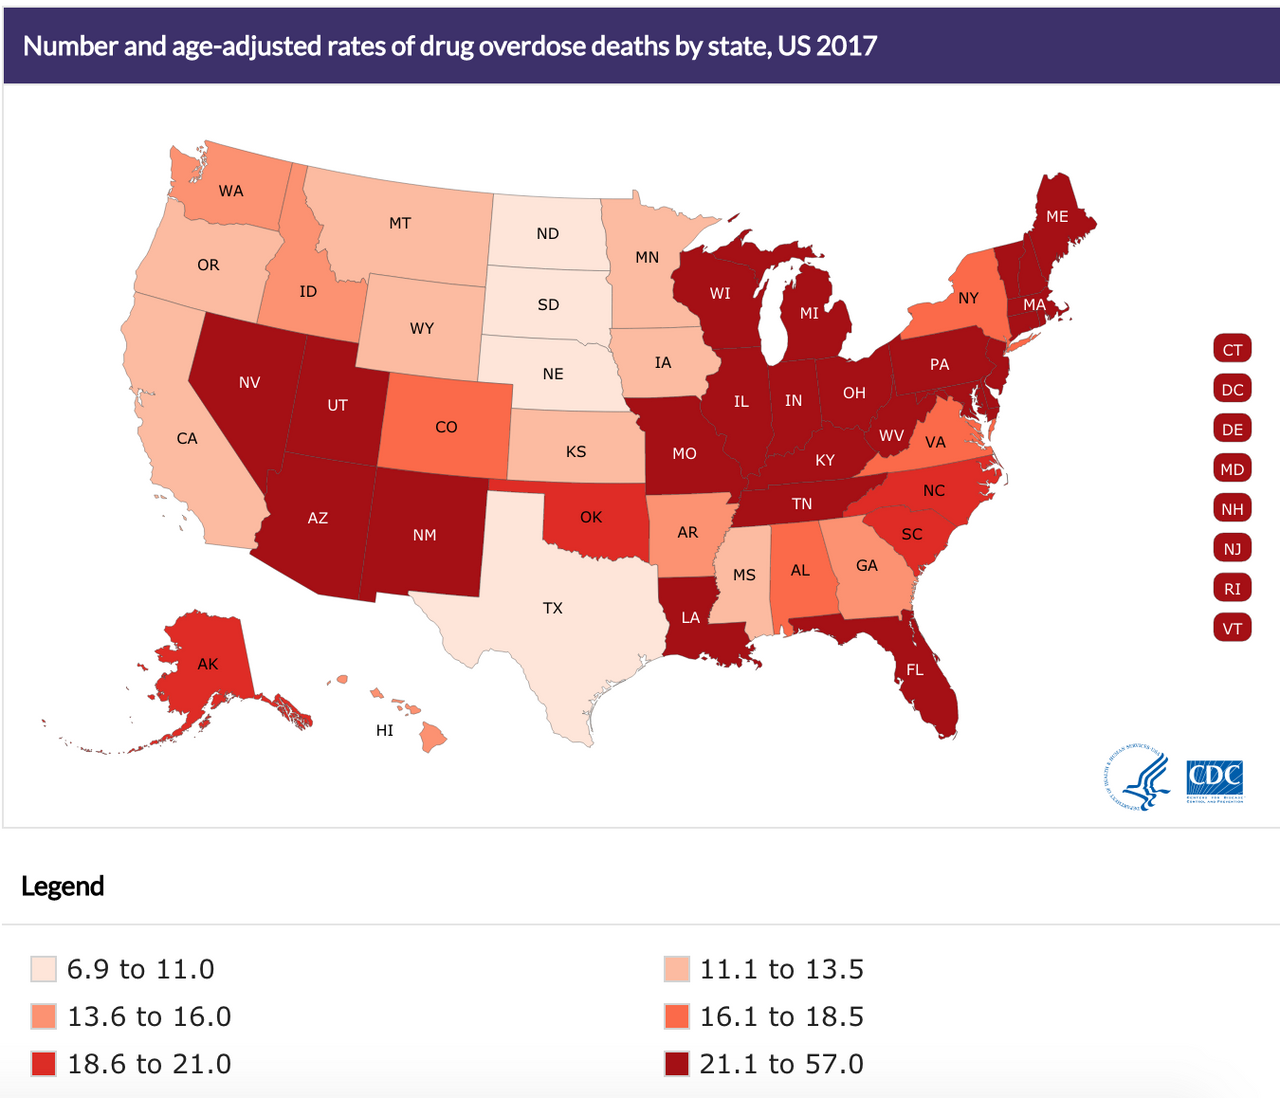 Rates of drug overdose deaths by state, US 2017. Source: CDC